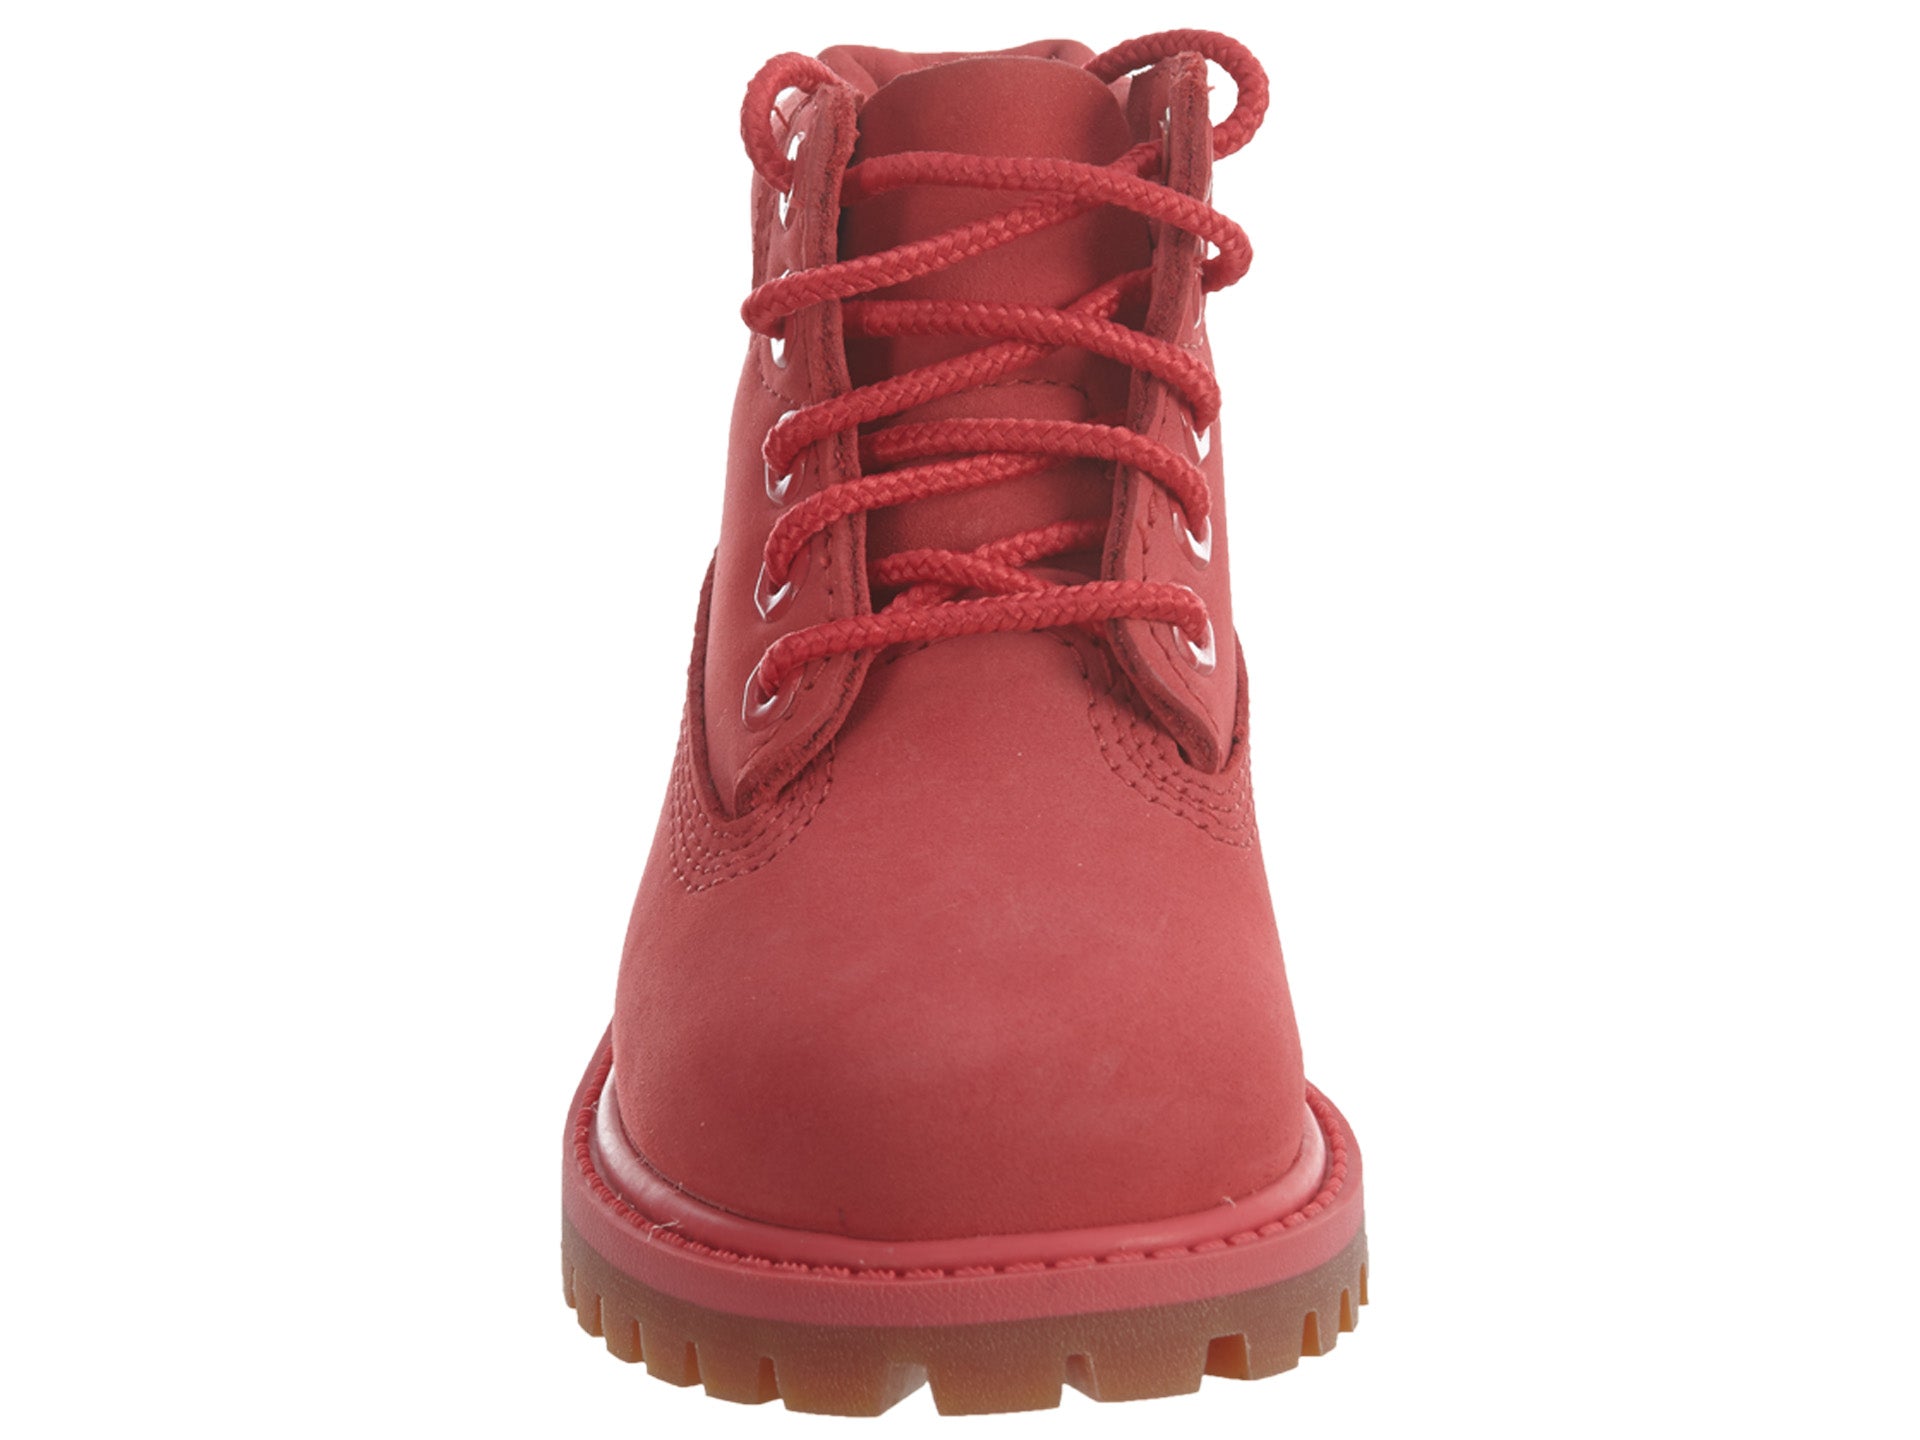 Timberland 6" Premium Boot Toddlers Style : Tb0a1ksx